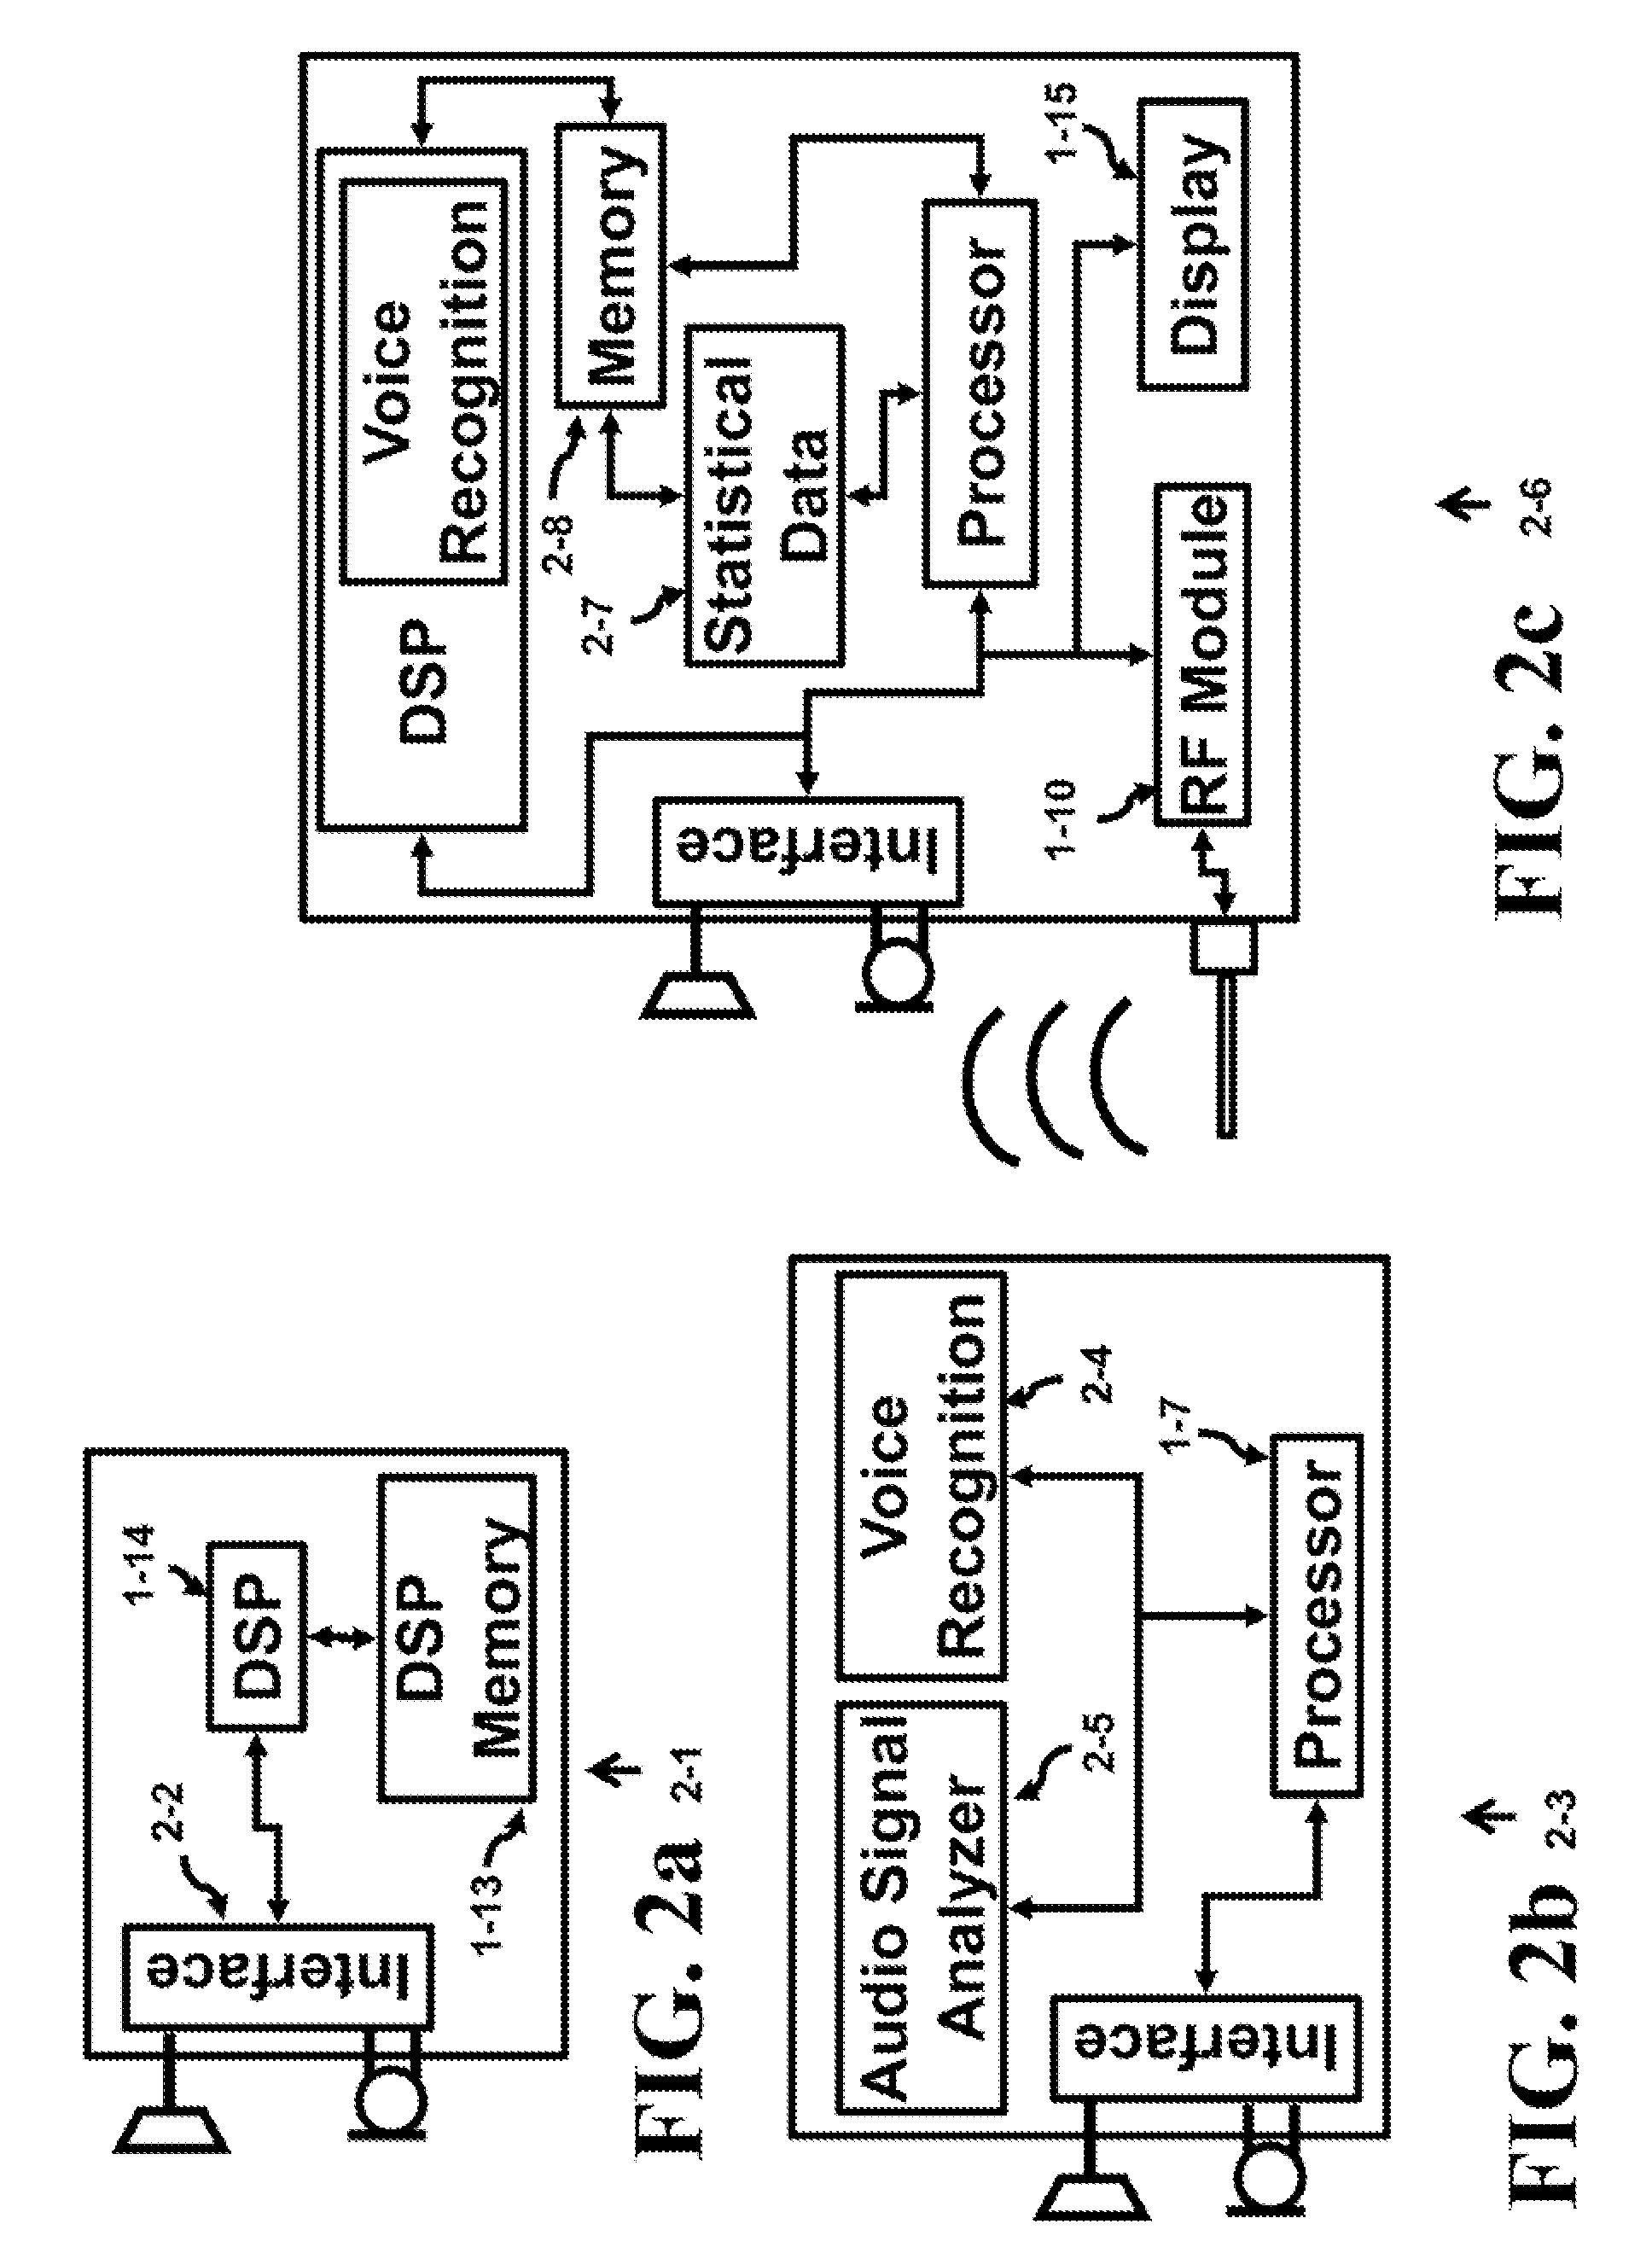 Method and Apparatus for Obtaining Statistical Data from a Conversation